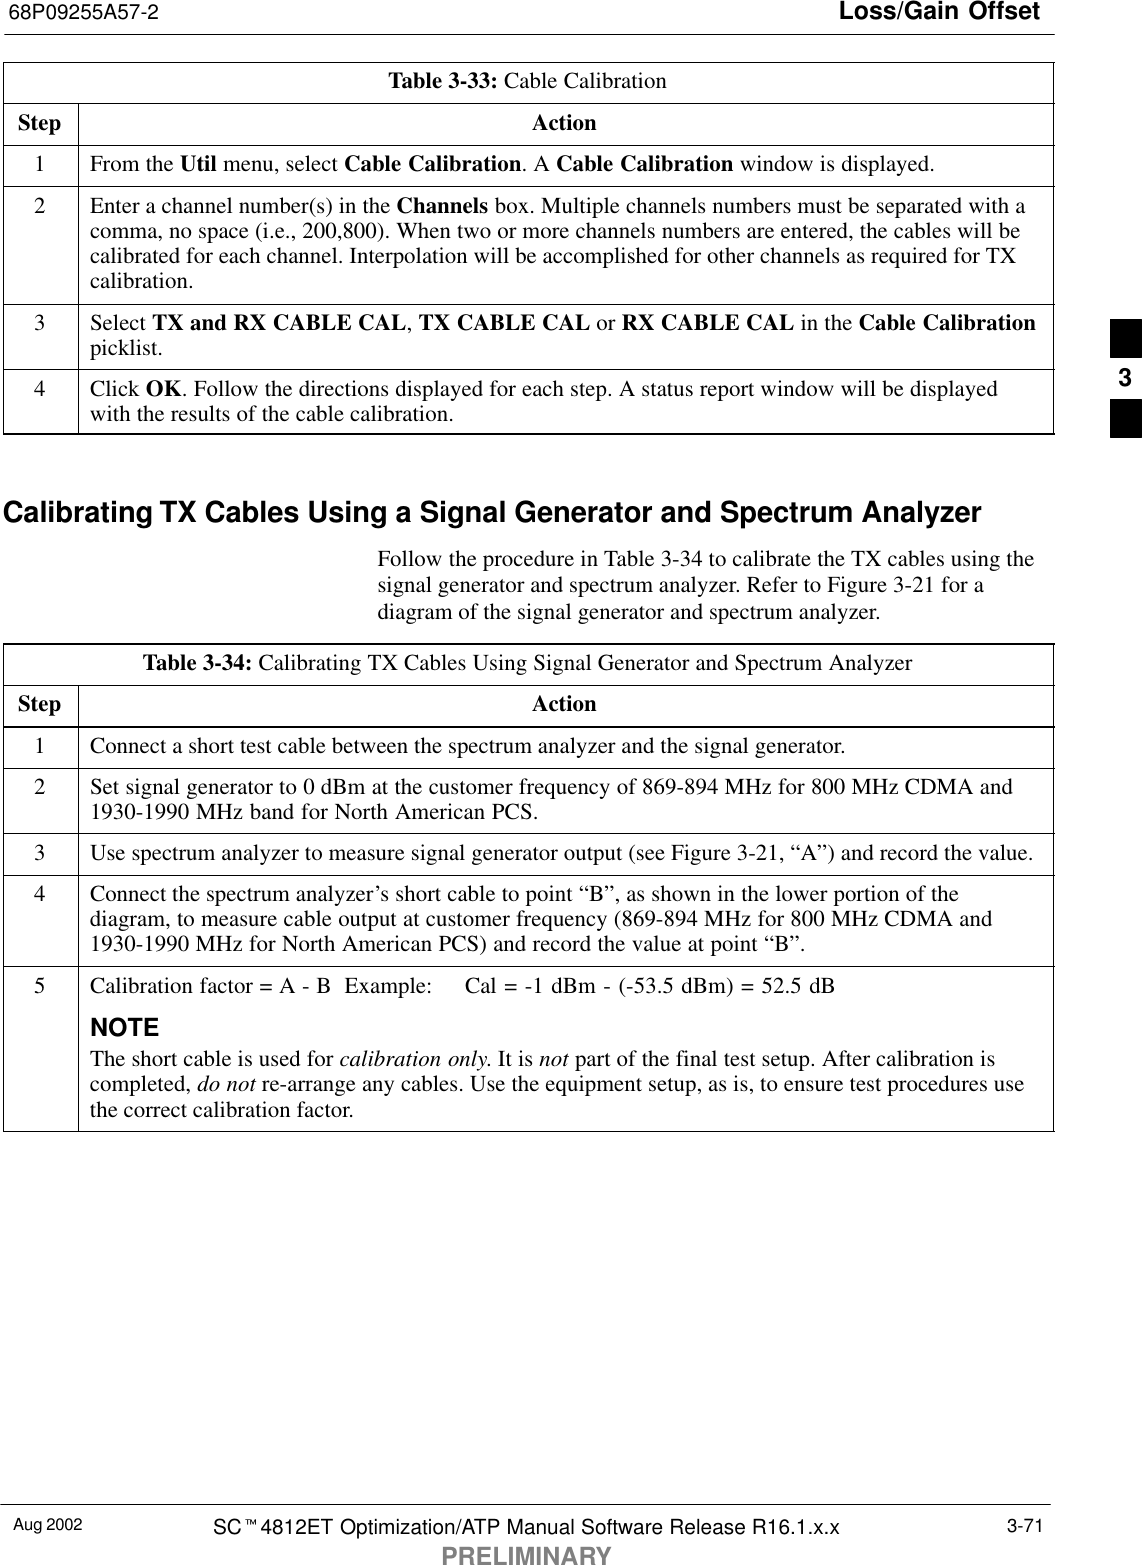 Loss/Gain Offset68P09255A57-2Aug 2002 SCt4812ET Optimization/ATP Manual Software Release R16.1.x.xPRELIMINARY3-71Table 3-33: Cable CalibrationStep Action1From the Util menu, select Cable Calibration. A Cable Calibration window is displayed.2Enter a channel number(s) in the Channels box. Multiple channels numbers must be separated with acomma, no space (i.e., 200,800). When two or more channels numbers are entered, the cables will becalibrated for each channel. Interpolation will be accomplished for other channels as required for TXcalibration.3 Select TX and RX CABLE CAL, TX CABLE CAL or RX CABLE CAL in the Cable Calibrationpicklist.4 Click OK. Follow the directions displayed for each step. A status report window will be displayedwith the results of the cable calibration. Calibrating TX Cables Using a Signal Generator and Spectrum AnalyzerFollow the procedure in Table 3-34 to calibrate the TX cables using thesignal generator and spectrum analyzer. Refer to Figure 3-21 for adiagram of the signal generator and spectrum analyzer.Table 3-34: Calibrating TX Cables Using Signal Generator and Spectrum AnalyzerStep Action1Connect a short test cable between the spectrum analyzer and the signal generator.2Set signal generator to 0 dBm at the customer frequency of 869-894 MHz for 800 MHz CDMA and1930-1990 MHz band for North American PCS.3Use spectrum analyzer to measure signal generator output (see Figure 3-21, “A”) and record the value.4Connect the spectrum analyzer’s short cable to point “B”, as shown in the lower portion of thediagram, to measure cable output at customer frequency (869-894 MHz for 800 MHz CDMA and1930-1990 MHz for North American PCS) and record the value at point “B”.5Calibration factor = A - B  Example:  Cal = -1 dBm - (-53.5 dBm) = 52.5 dBNOTEThe short cable is used for calibration only. It is not part of the final test setup. After calibration iscompleted, do not re-arrange any cables. Use the equipment setup, as is, to ensure test procedures usethe correct calibration factor.3